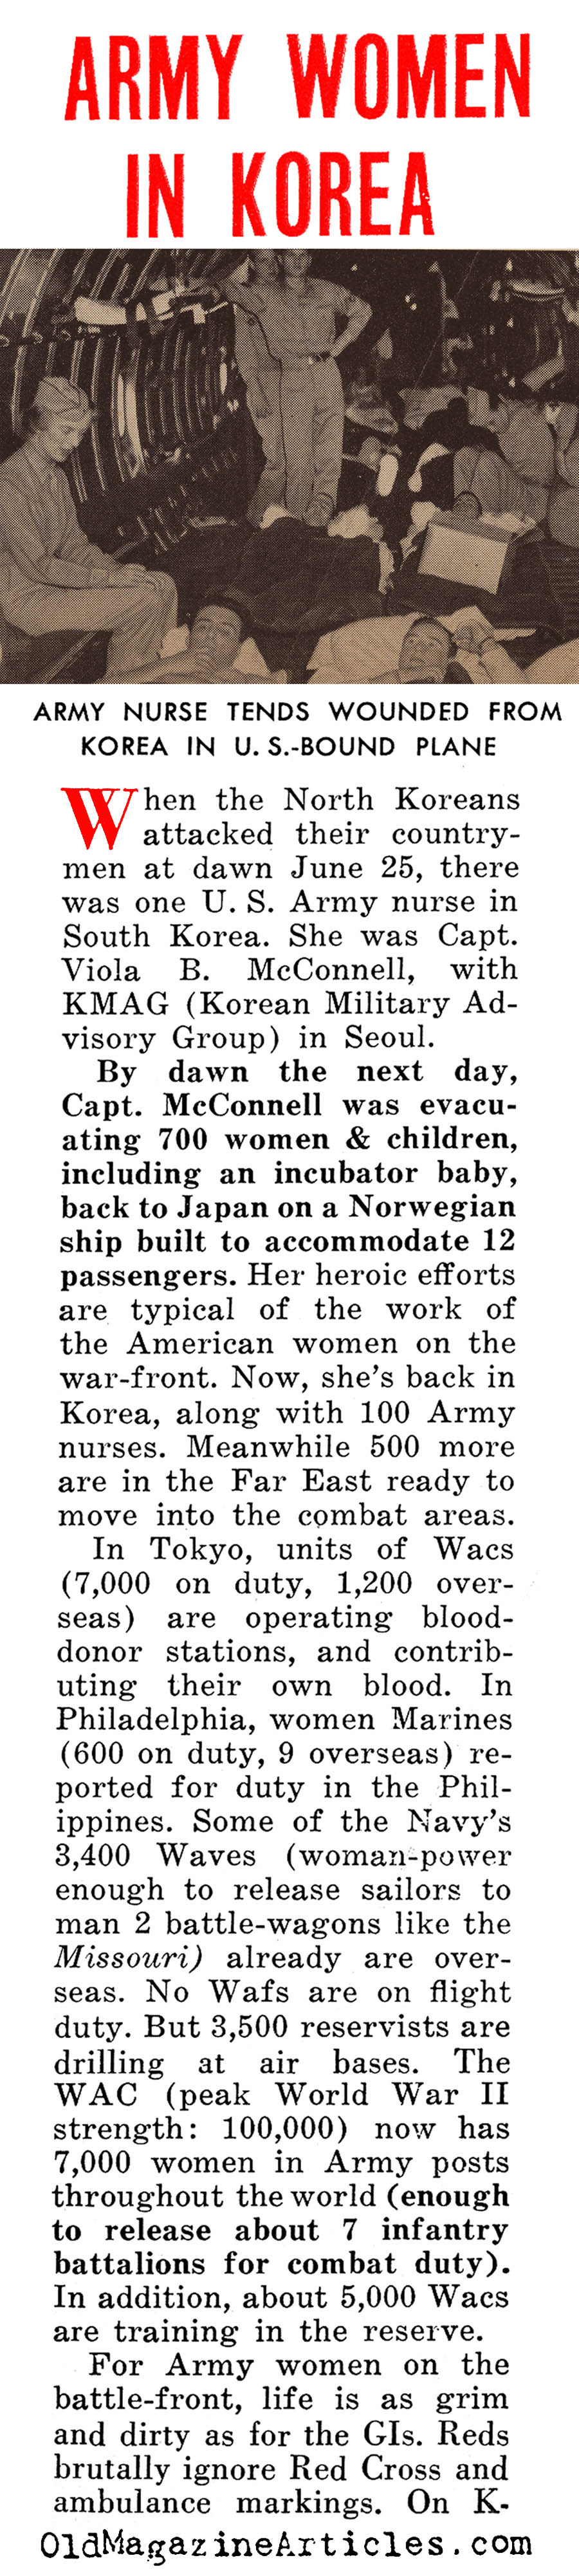 American Women in the Early War (People Today Magazine, 1950)